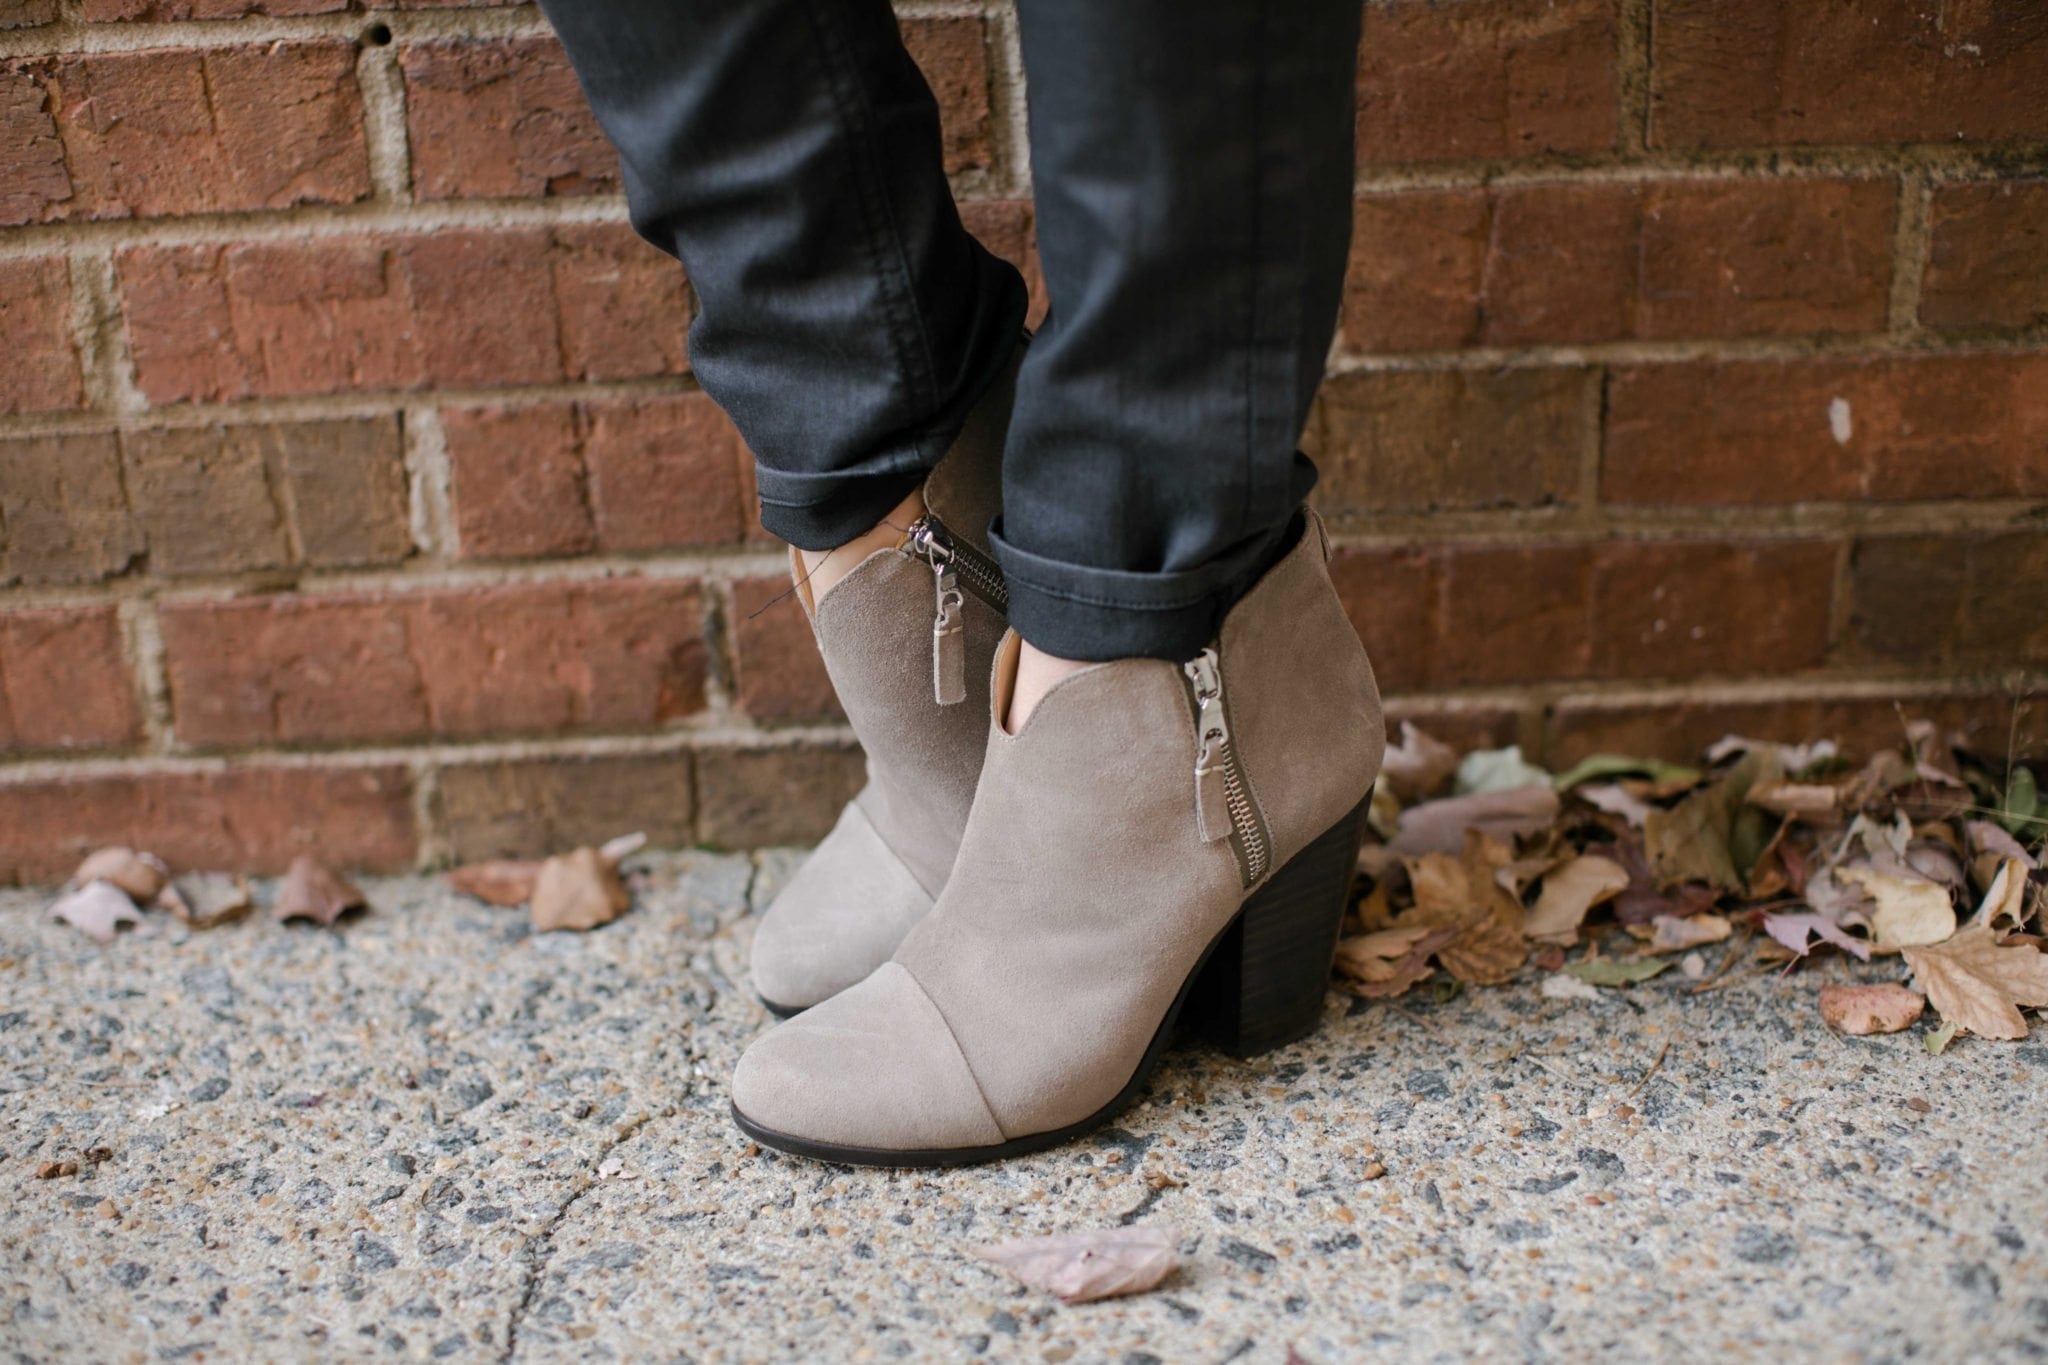 neutral suede booties with black pants and zipper side booties. nordstrom anniversary sale shoes